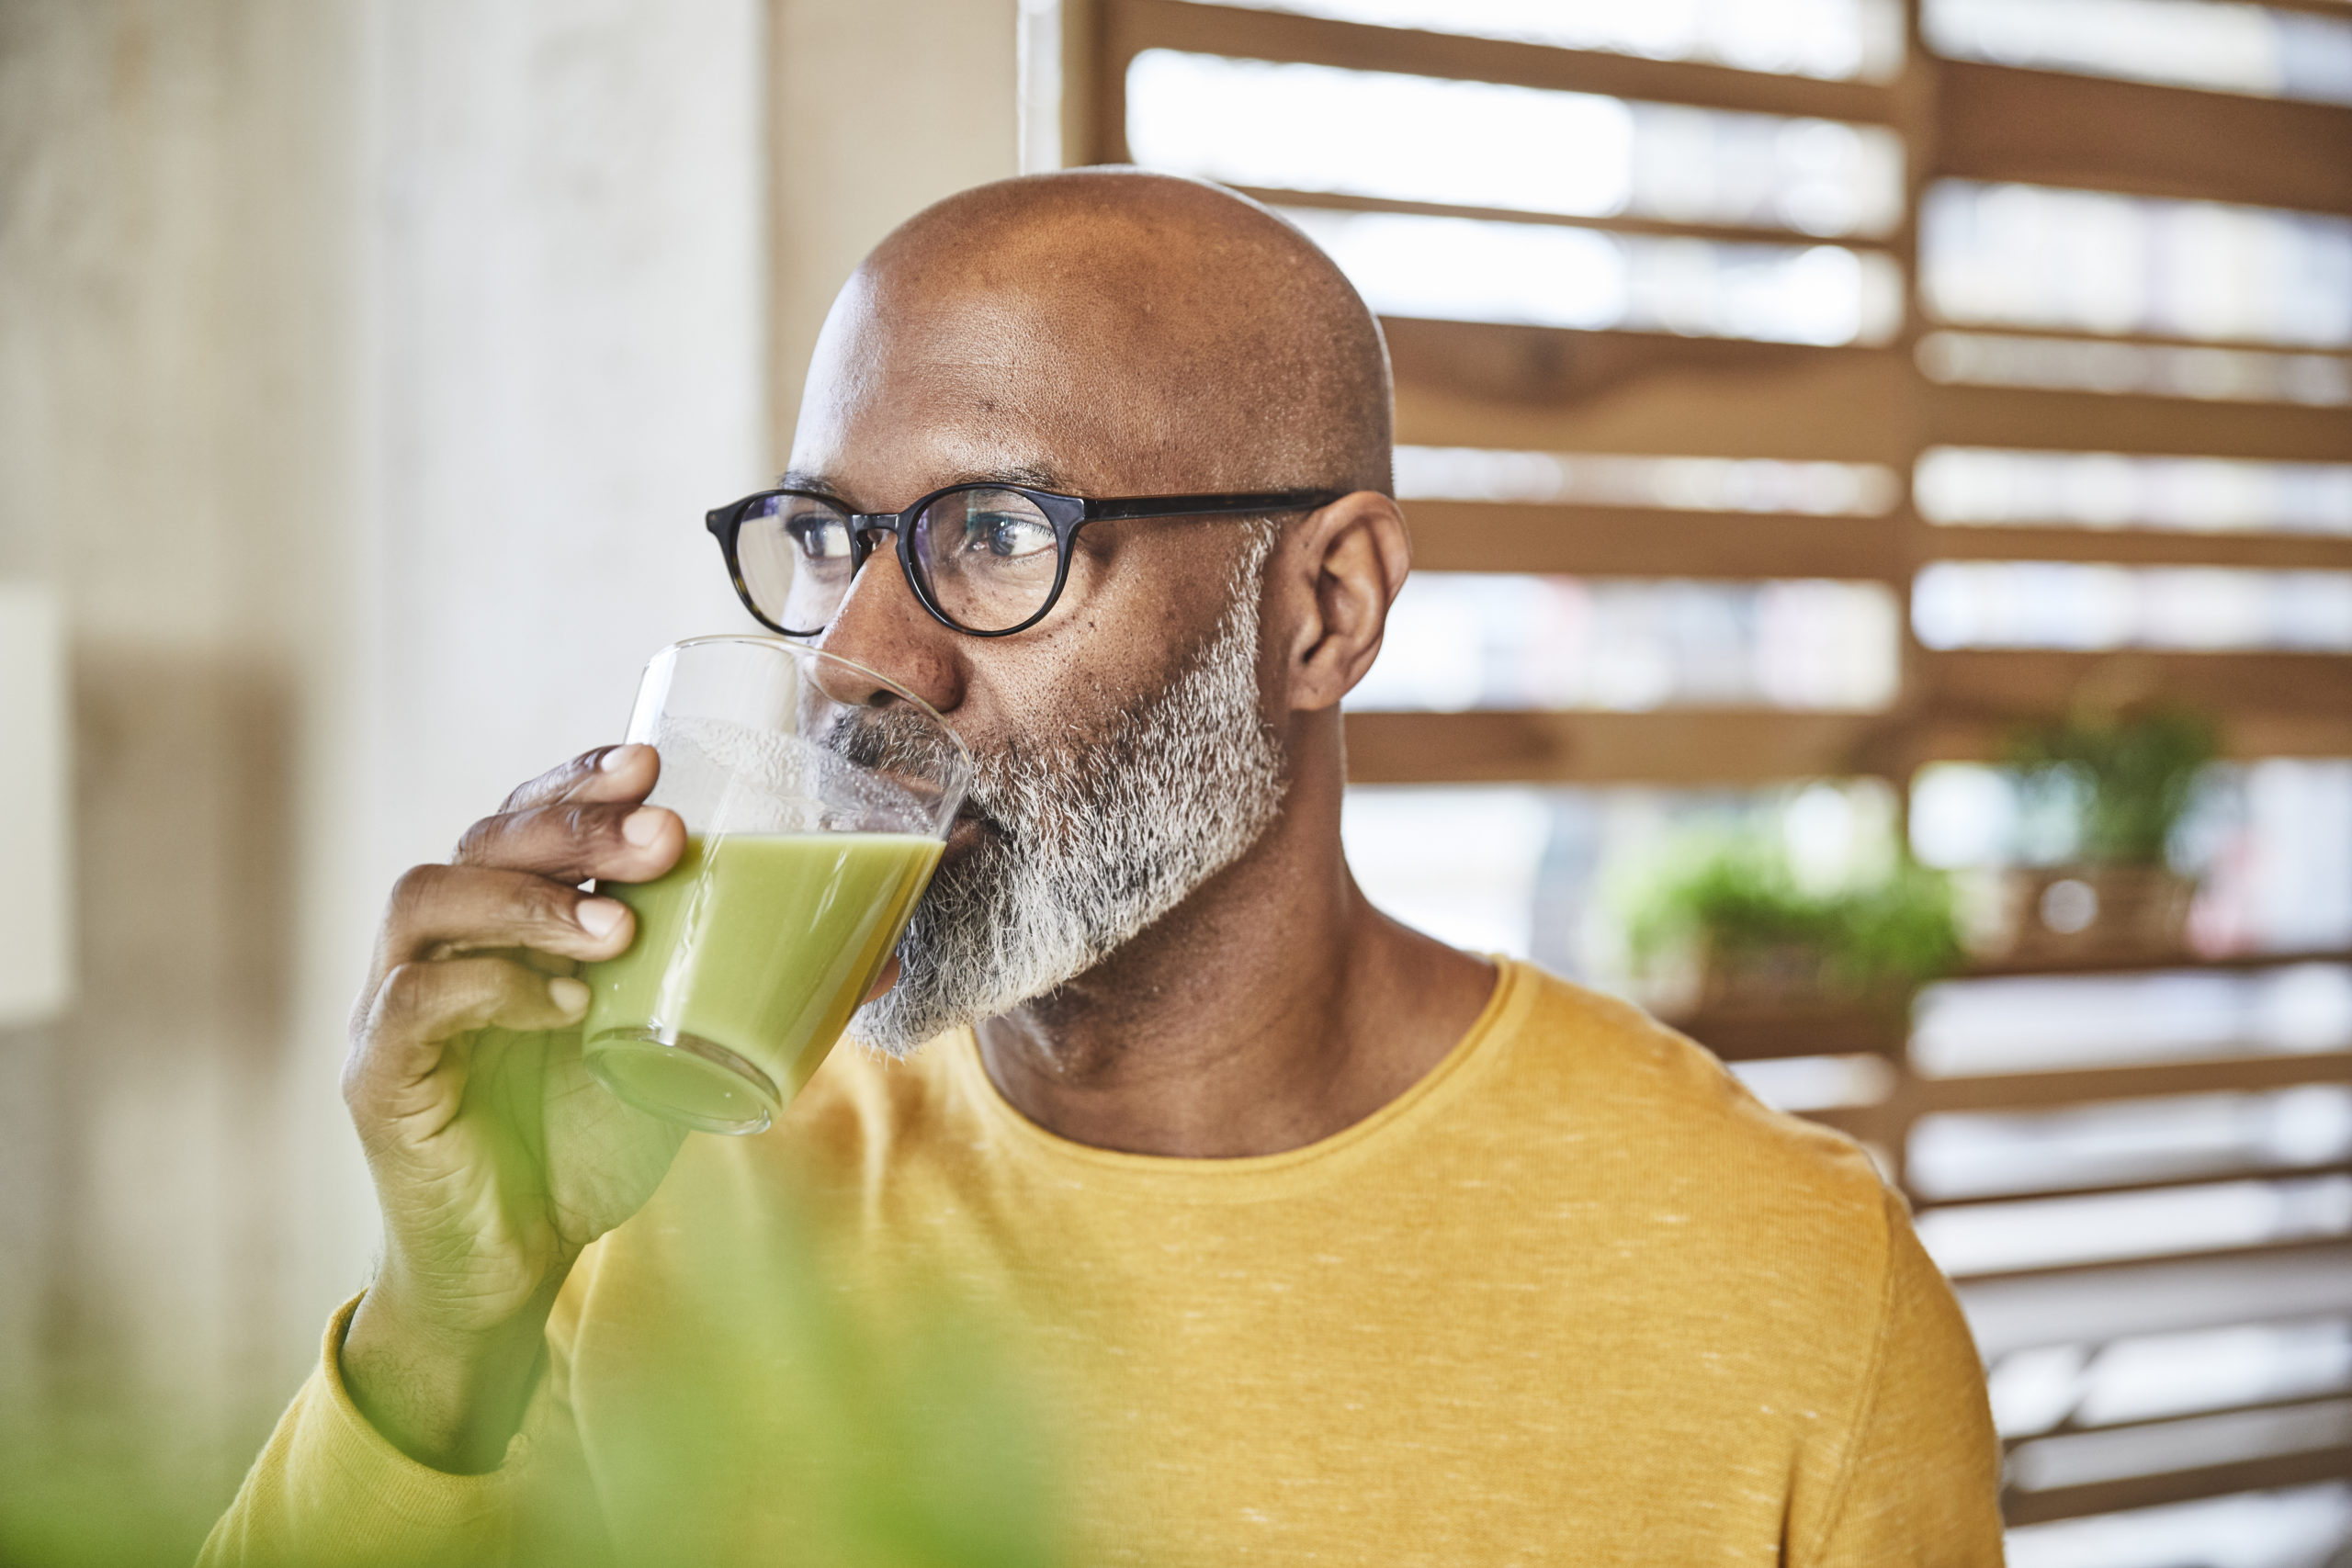 Mature businessman in office drinking a smoothie as part of an employee wellness initiative